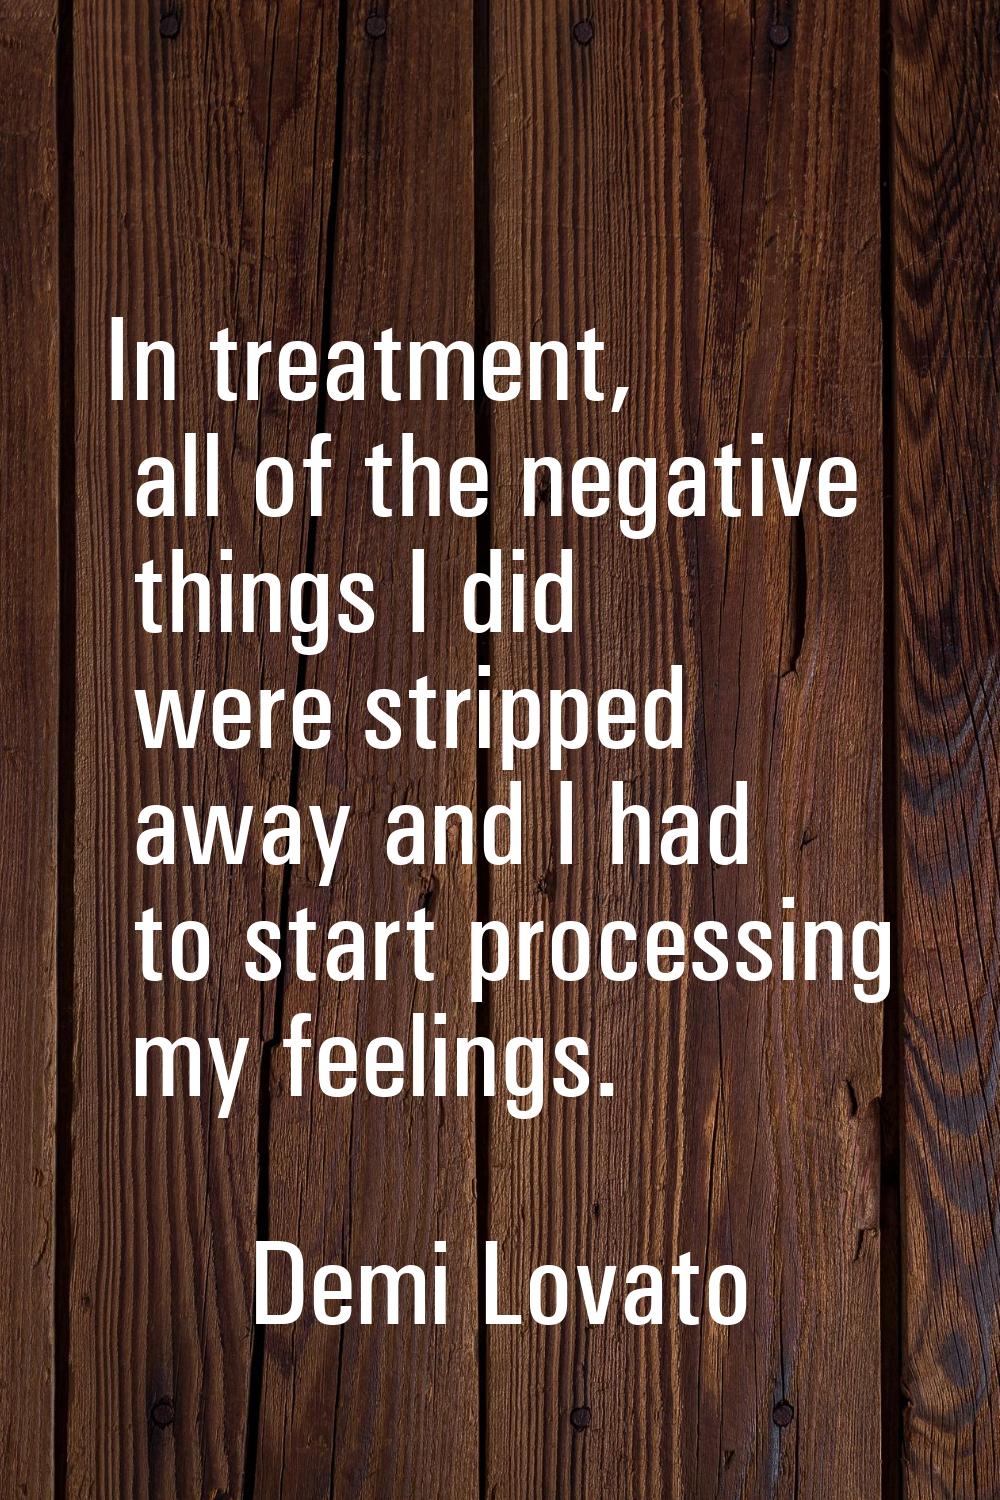 In treatment, all of the negative things I did were stripped away and I had to start processing my 